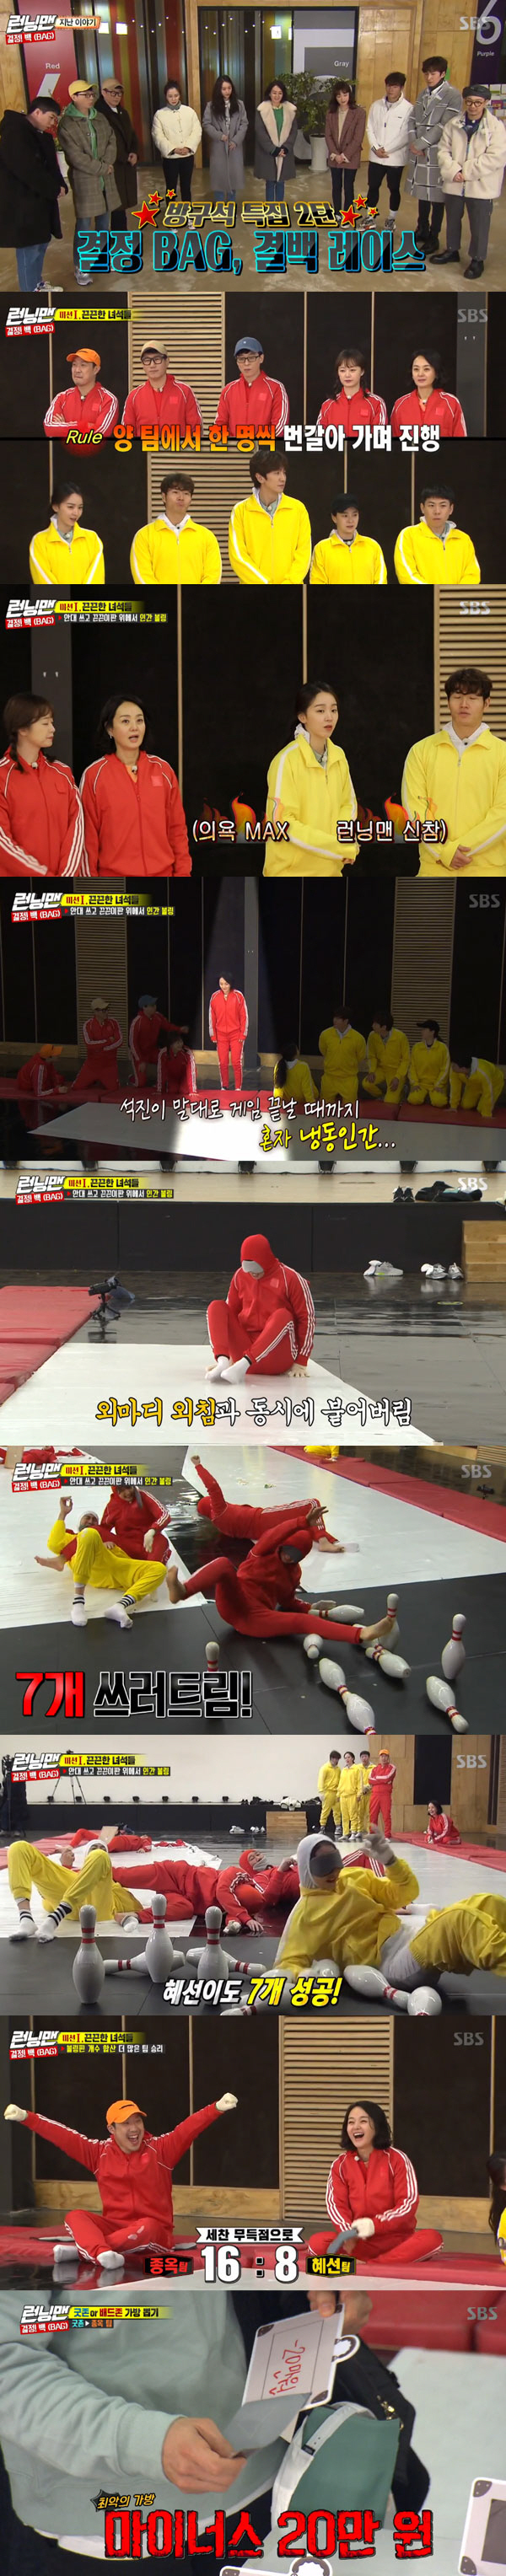 Running Man Bae Jong-ok wins final title in Decision! Back (BAG) RaceOn SBS Running Man broadcast on the 1st, Decision! Back (BAG) was missioned with Bae Jong-ok and Shin Hye-sun as guests.On this day, the Bae Jong-ok team and Shin Hye-sun team were divided into missions, and the first mission was to play human bowling on the sticky plate with sweet guys.First, Ji Suk-jin of the Bae Jong-ok team and Lee Kwang-soo of the Shin Hye-sun team challenged.However, the stickys strong adhesion failed, and Shin Hye-suns Kim Jong-kook succeeded in knocking down one.The failure continued after that, while Bae Jong-ok and Shin Hye-sun succeeded in knocking down seven.The Bae Jong-ok team then scored nine and the Bae Jong-ok team won the first round with 16 to 8.The Bae Jong-ok team went to Good Zone and the Shin Hye-sun team pulled a bag from the bad zone. As a result, Bae Jong-ok picked up +70,000 won and climbed to the top with 80,000 won.On the other hand, Kim Jong-kook won -200,000 won and was ranked 10th with -150,000 won.The second round is Nunchibab auction, which adds up the food auction by round and more teams win.The first round was a draw, and the second and third rounds were won by Shin Hye-sun, winning pizza and jajangmyeon.The third round was a victory for the Bae Jong-ok team, but the second round was a victory for the Shin Hye-sun team due to overwhelming price differences.Shin Hye-sun team went on to draw bags in Good Zone, Bae Jong-ok team pulled bags in Bad Zone, and Shin Hye-sun finished first with 120,000 won, Kim Jong-kook picked + 1,000 won, and finished second round with -149,000 won.The final mission is the Mafia War, in which one Mafia during the talk must perform the mission word; after the talk is terminated, a prize votes for one suspected Mafia.Mafia is a victory for the citizen in the success of the arrest, Mafia in the failure of the arrest.The members conducted a daily talk to arrest Mafia, and then got one vote for Yang Se-chan, one for Lee Kwang-soo, and three for Shin Hye-sun.But the real Mafia was Song Ji-hyo; also the Mafia word Odintsovo.Song Ji-hyo had succeeded in speaking of Odintsovo with the help of Yoo Jae-Suk; in the second round, he succeeded in arresting Mafia.Mafia was Ji Suk-jin, and the Mafia word was a goblin bat.The final bag was drawn, and the final result was Bae Jong-ok, and Ji Suk-jin, the second place, won the al ring.On the other hand, Kim Jong-kook and Jeon So-min were in 10th and 9th place, and received the final fresh cream penalty.